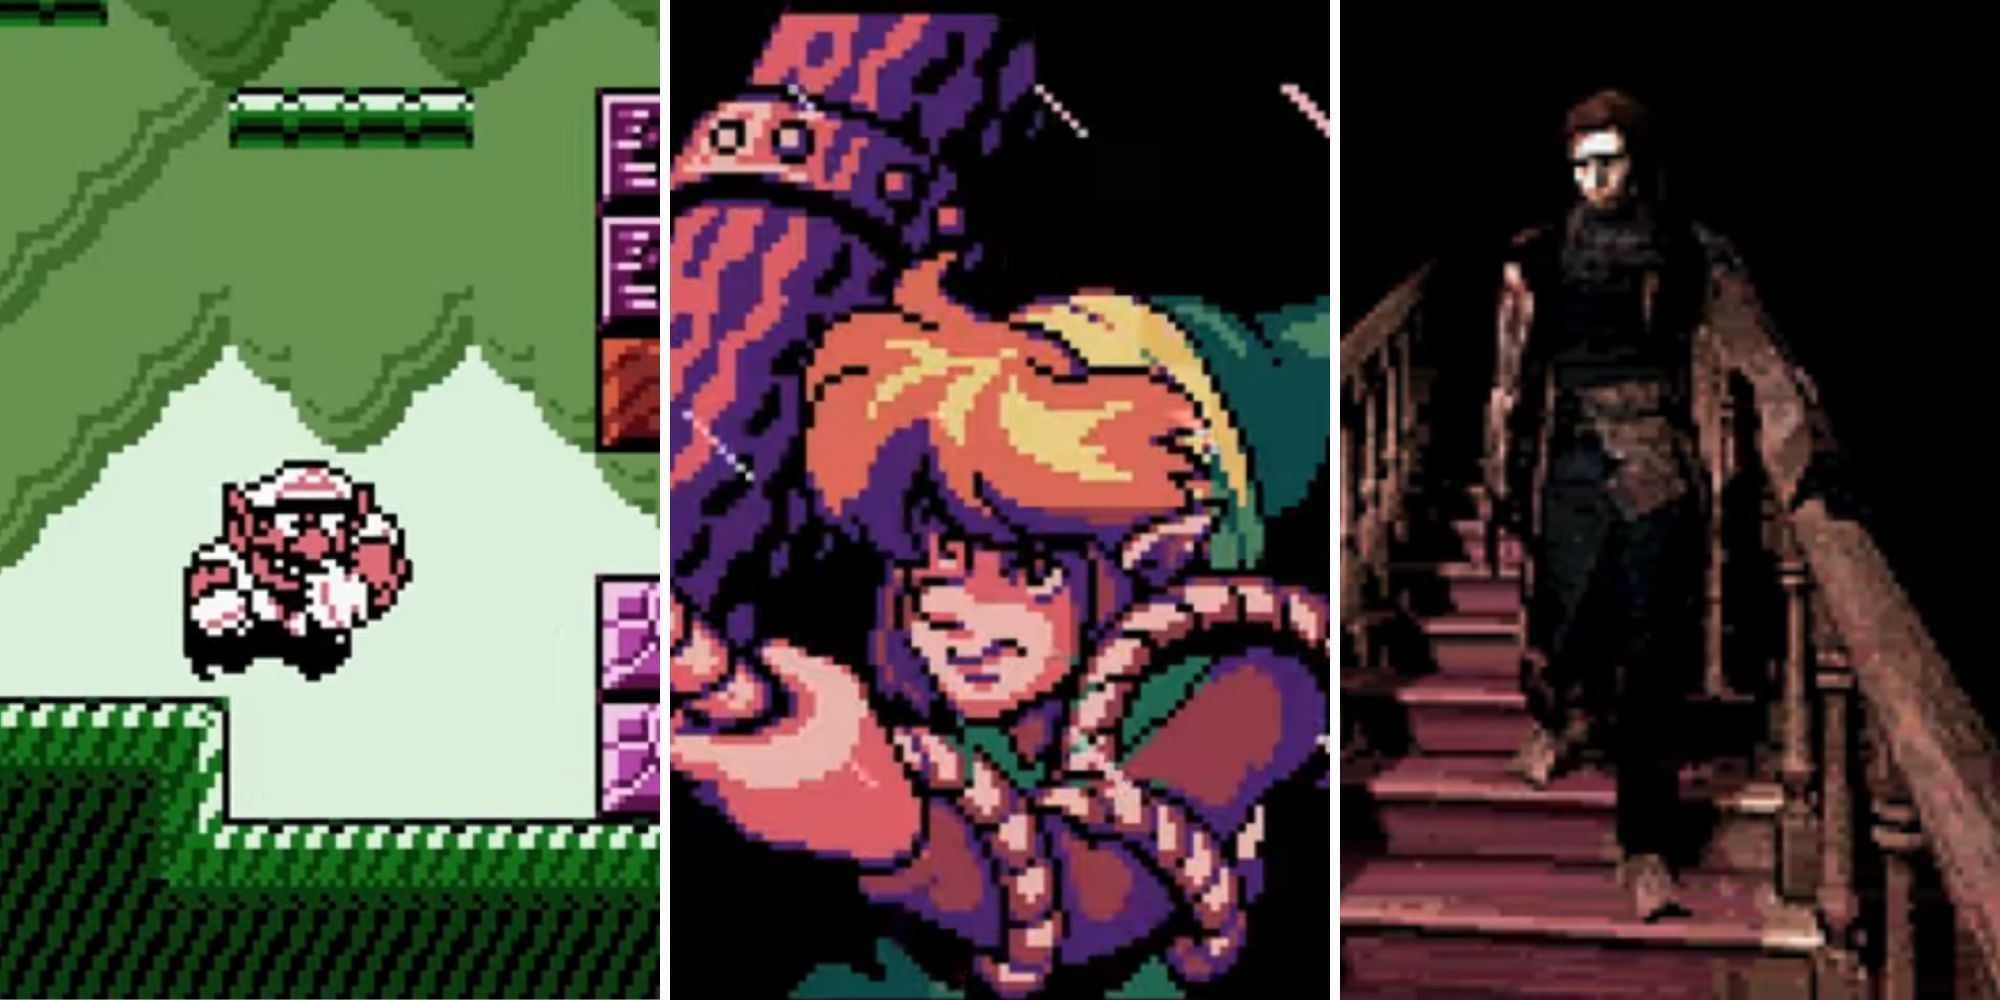 Wario jumps over a small gap, Link holds on to a raft during a storm, Carnby walks down stairs in the dark